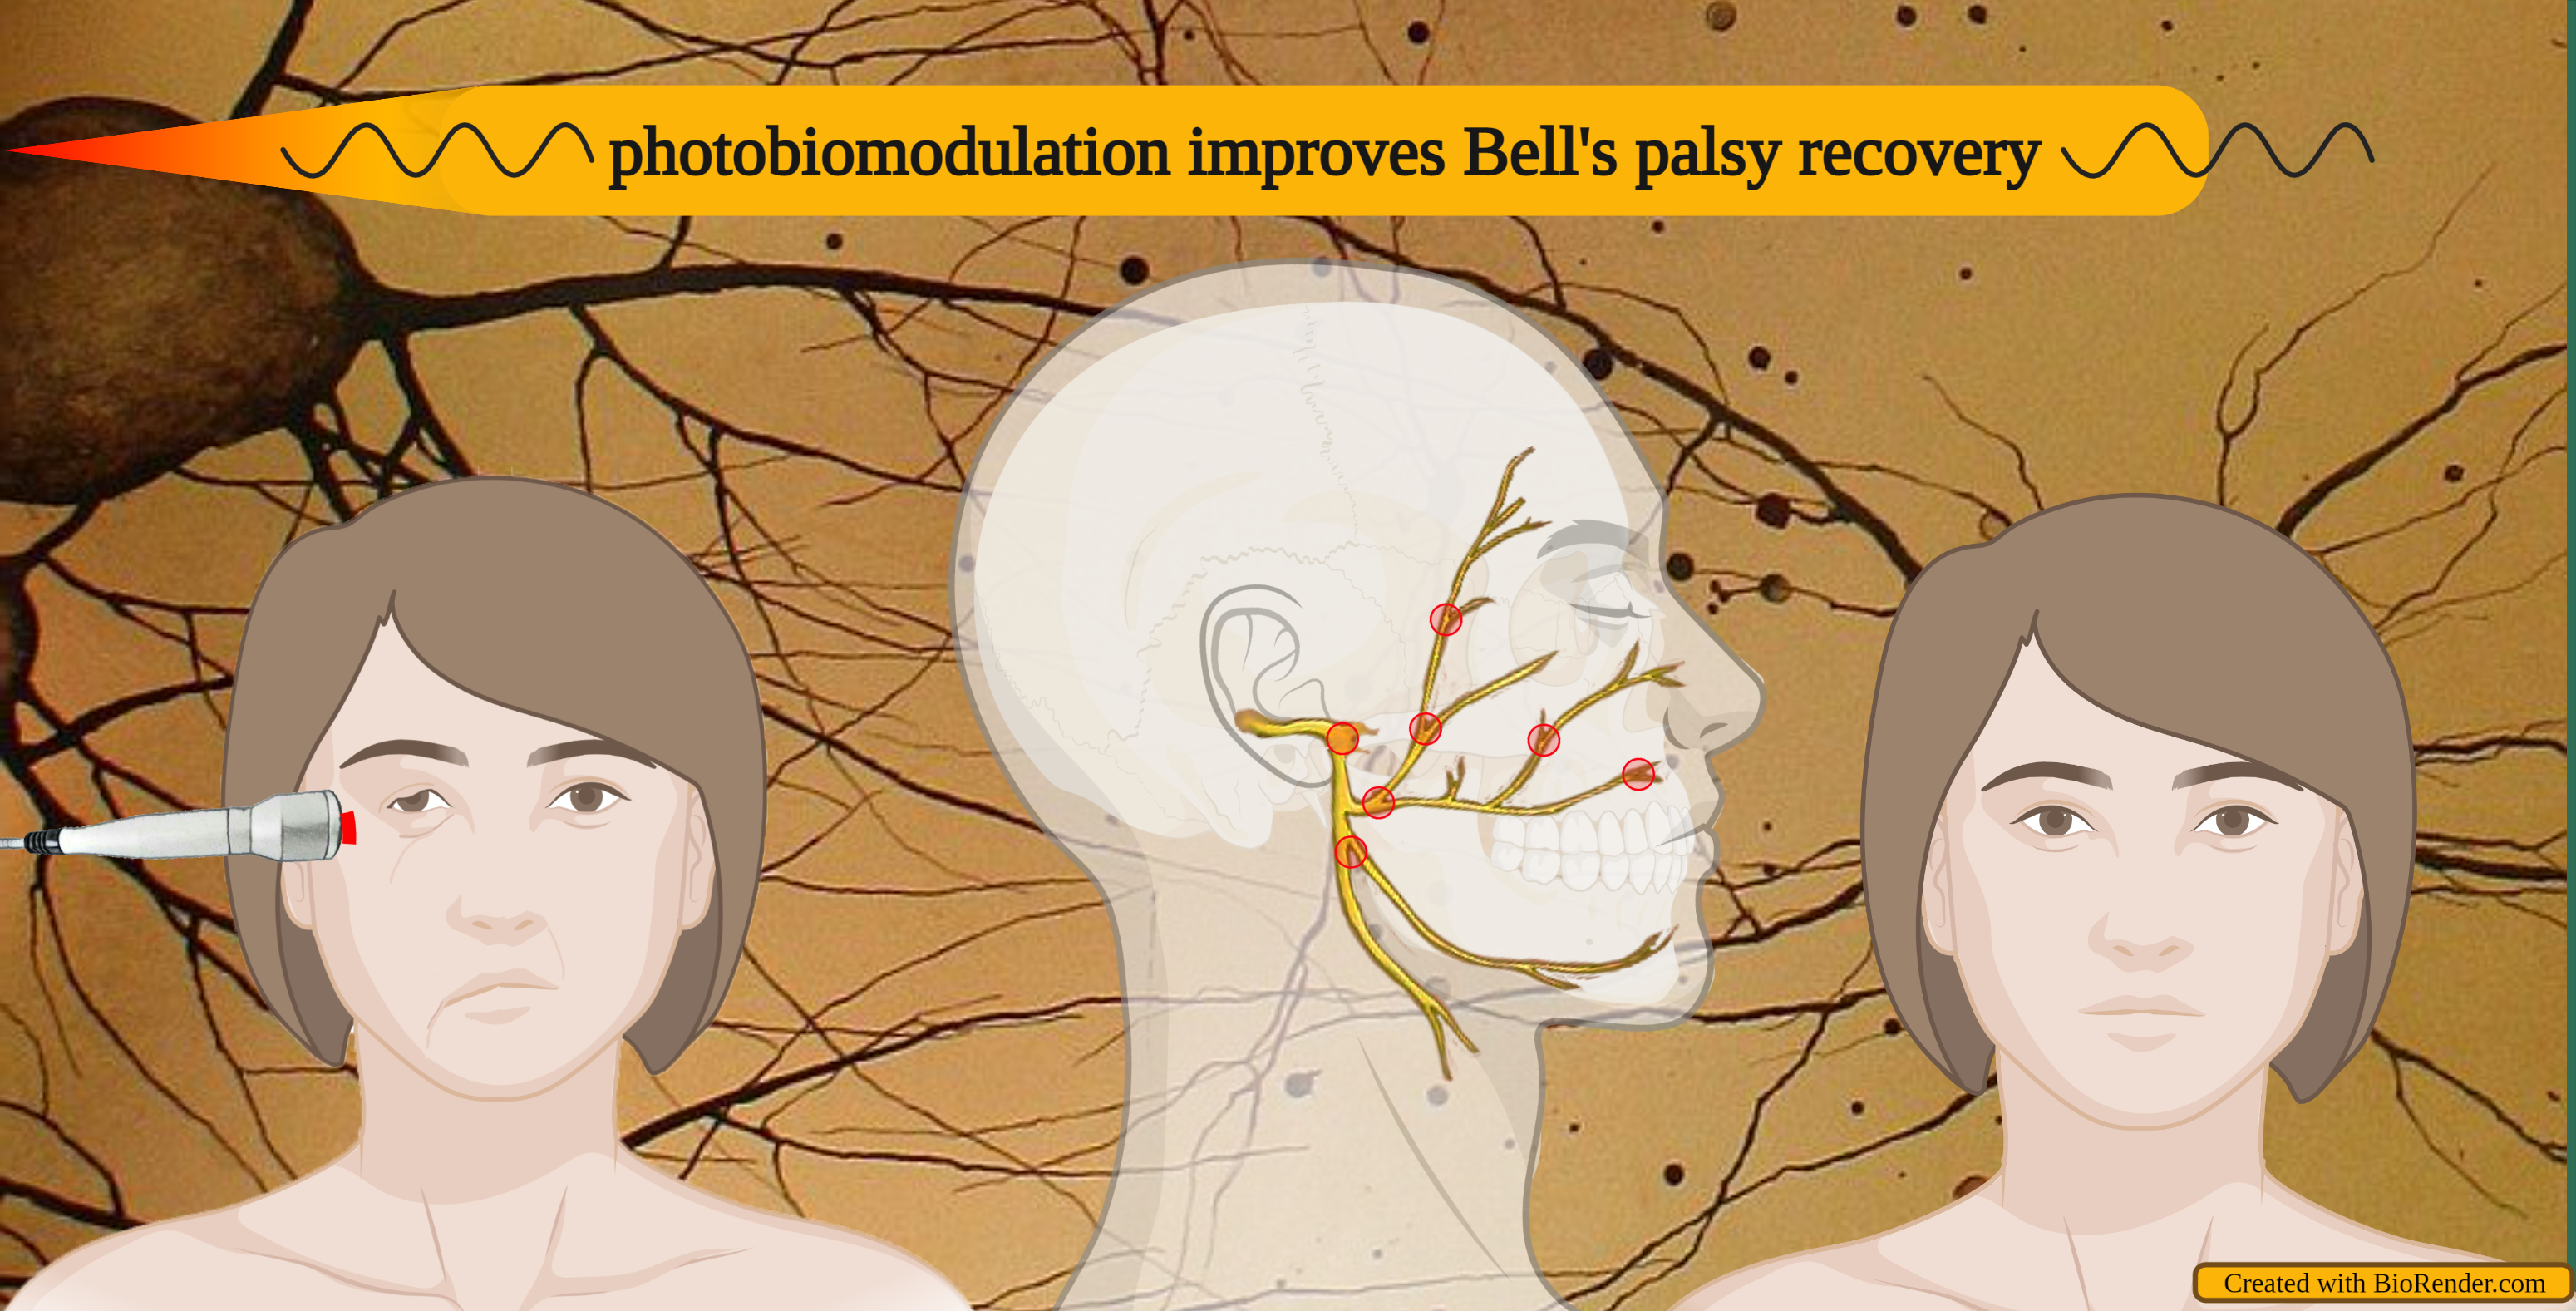 Pharmacological Treatments of Bell's Palsy in Adults: A Systematic